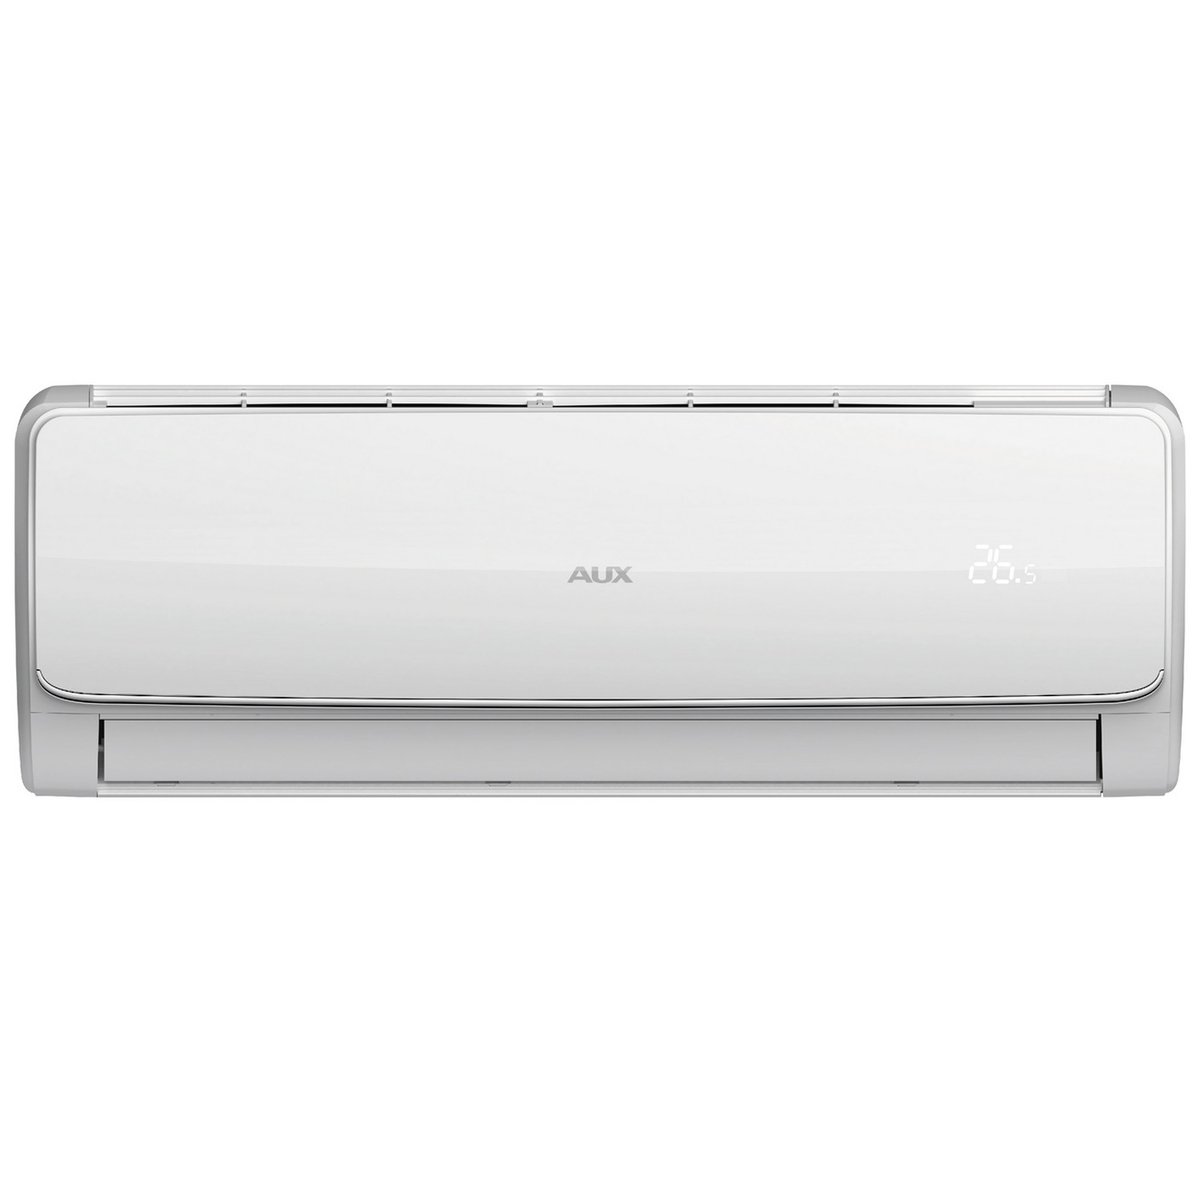 Aux Split Air Conditioner With Inverter Technology ASTWH12A4 1Ton